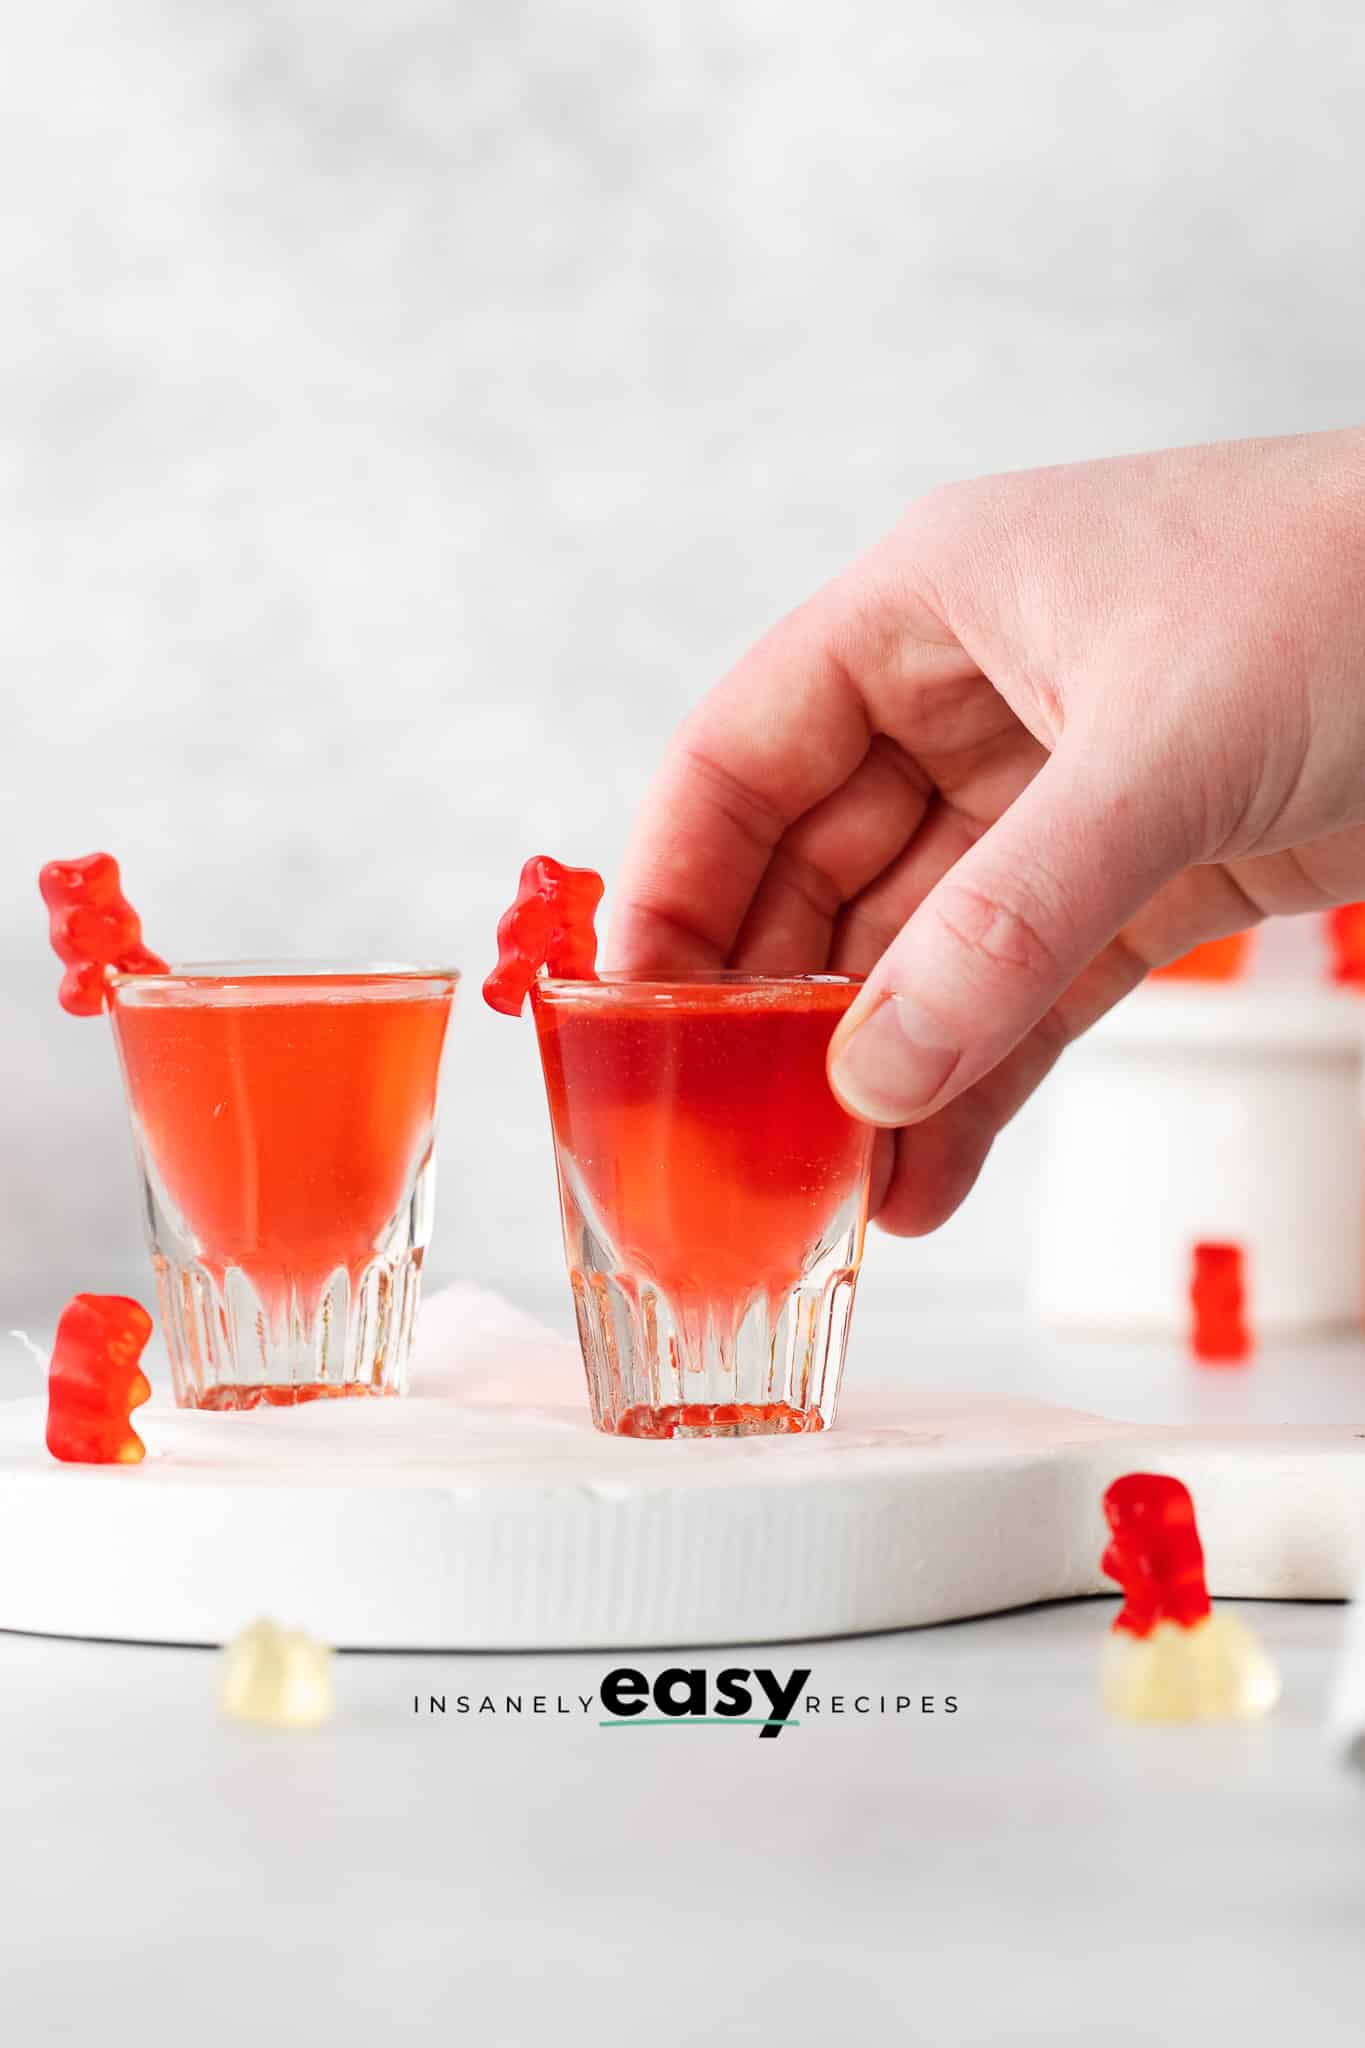 clear shot glasses filled with red liquid and a red gummy beaer on top, some gummy bears scattered on the table.